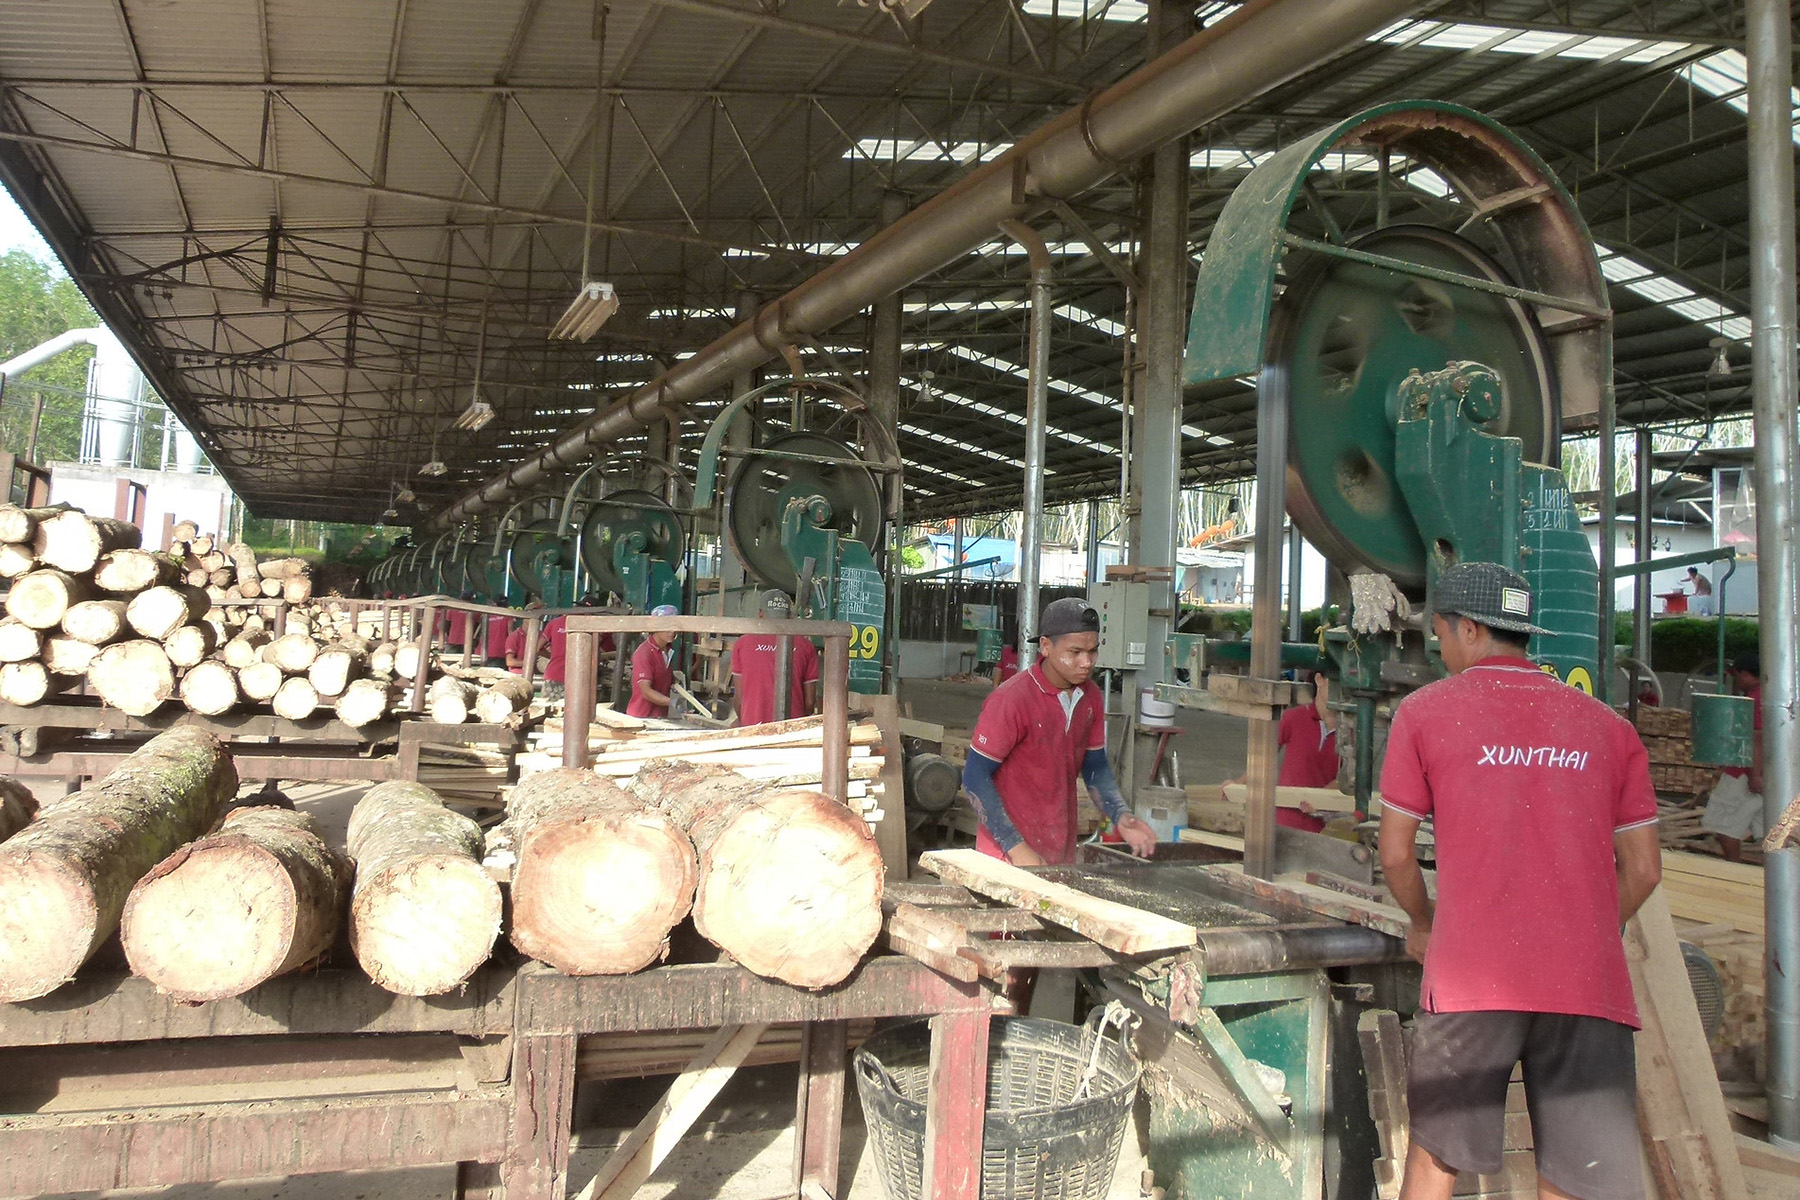 rubberwood parawood being cut and processed at the factory